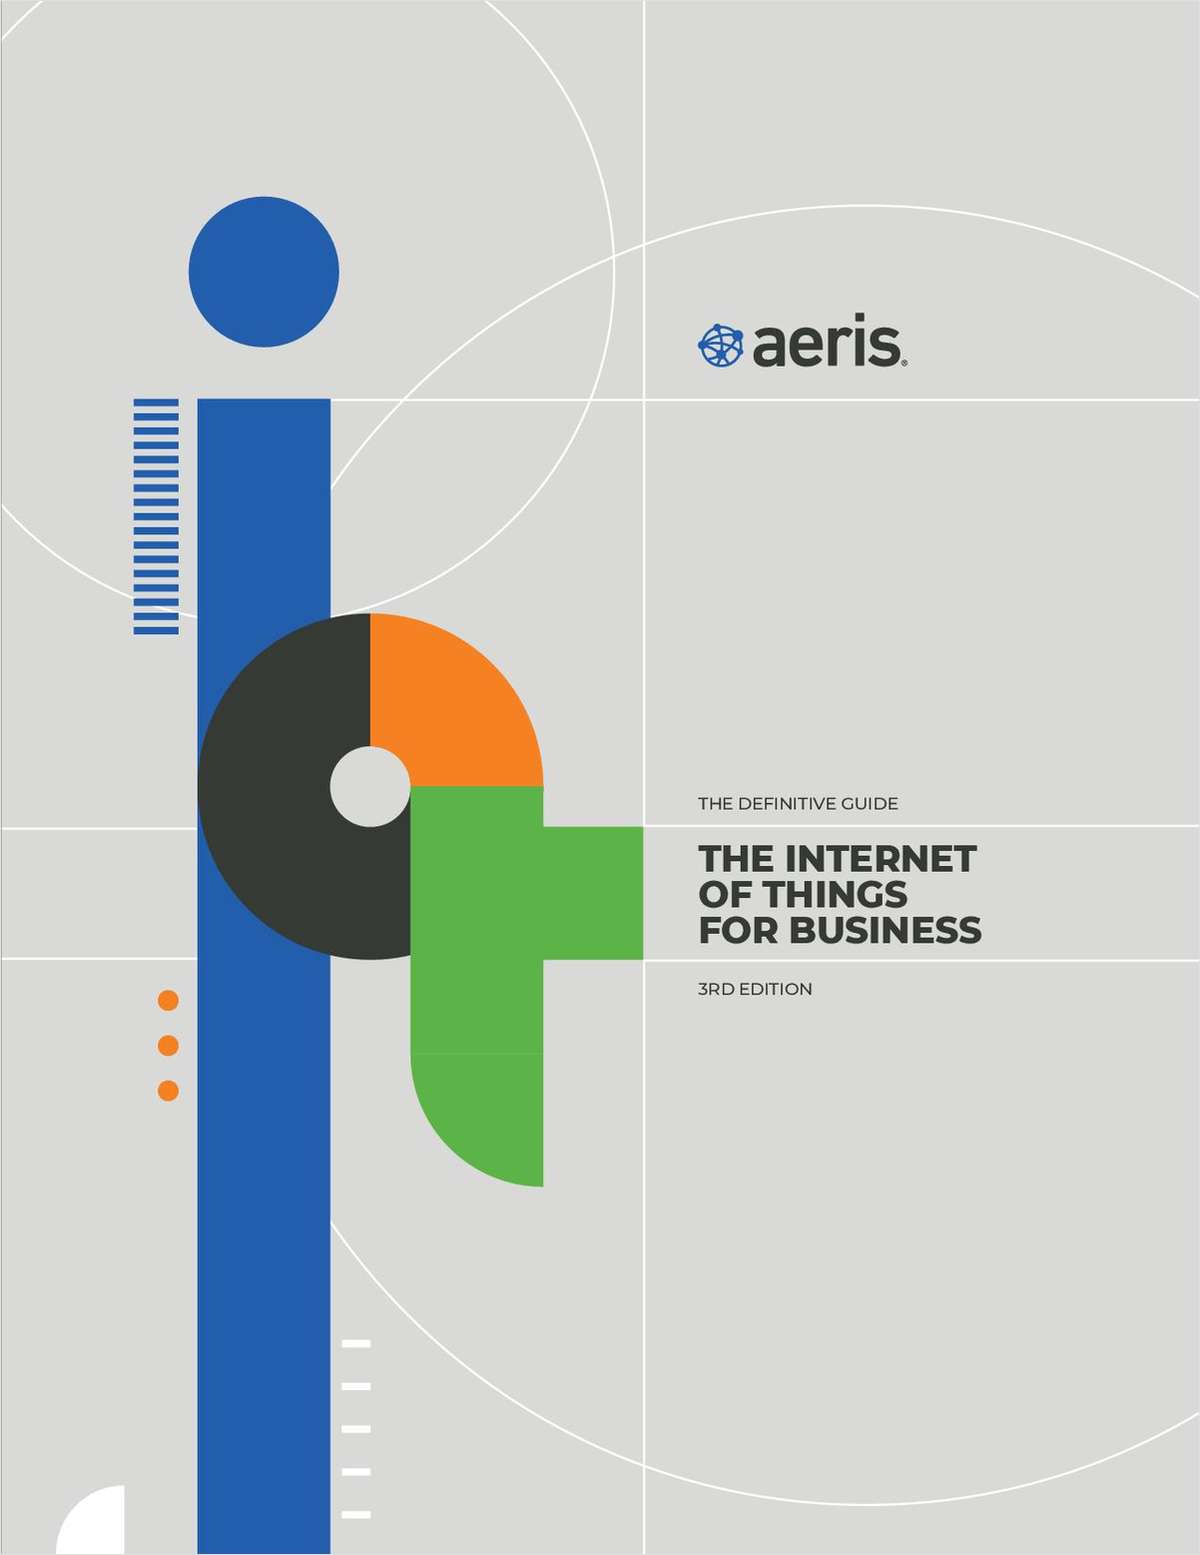 The Internet of Things for Business - 3rd Edition